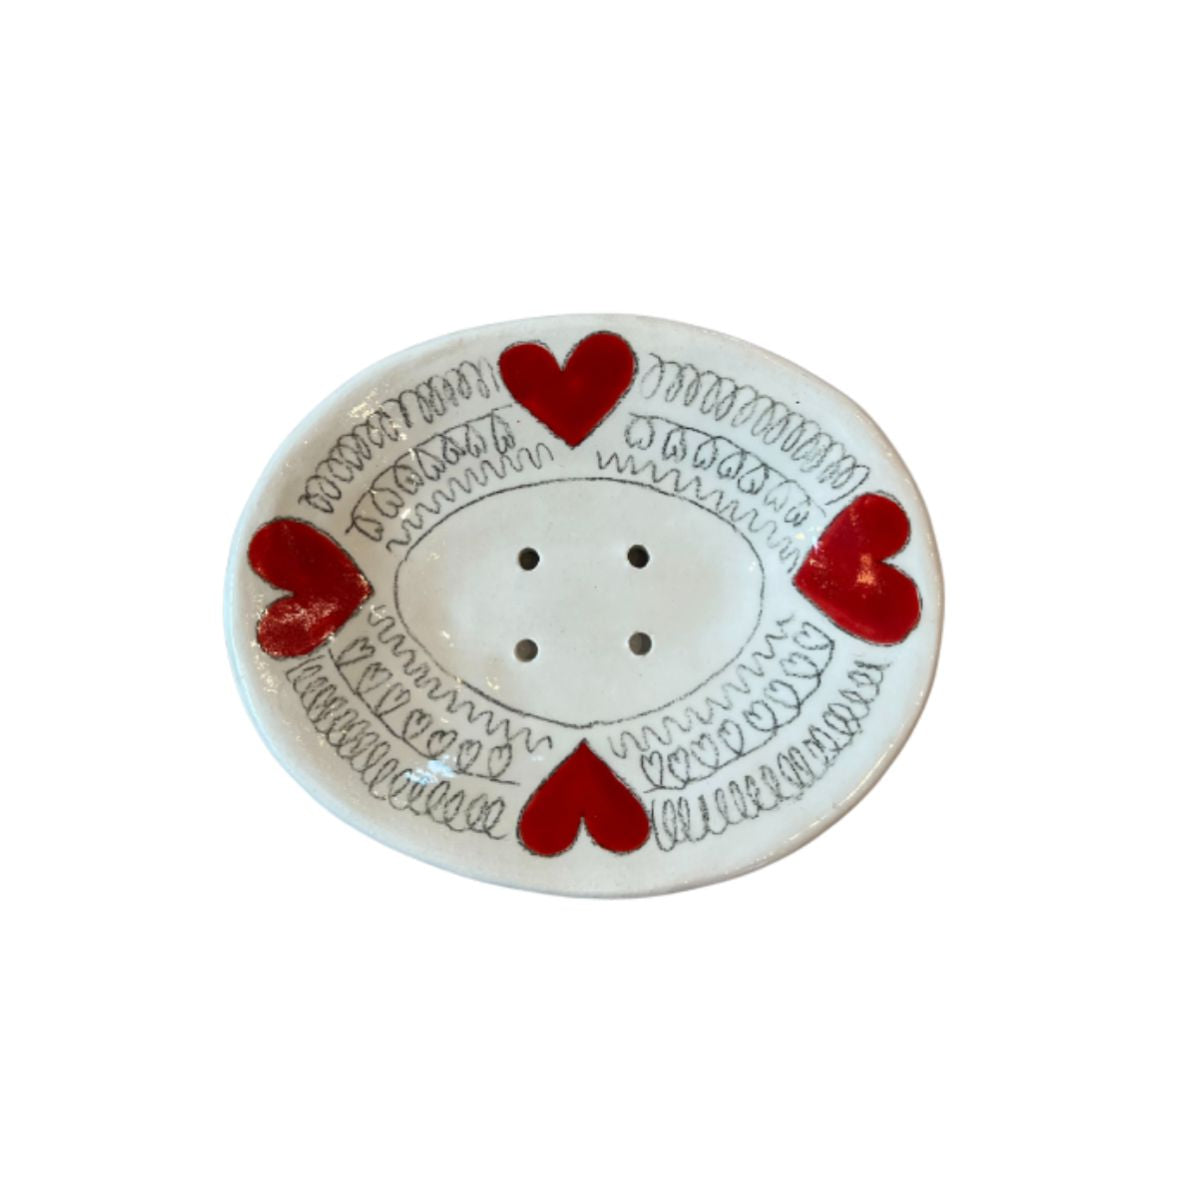 White Hand-painted Ceramic Soap Dish With Hearts-Bespoke Designs